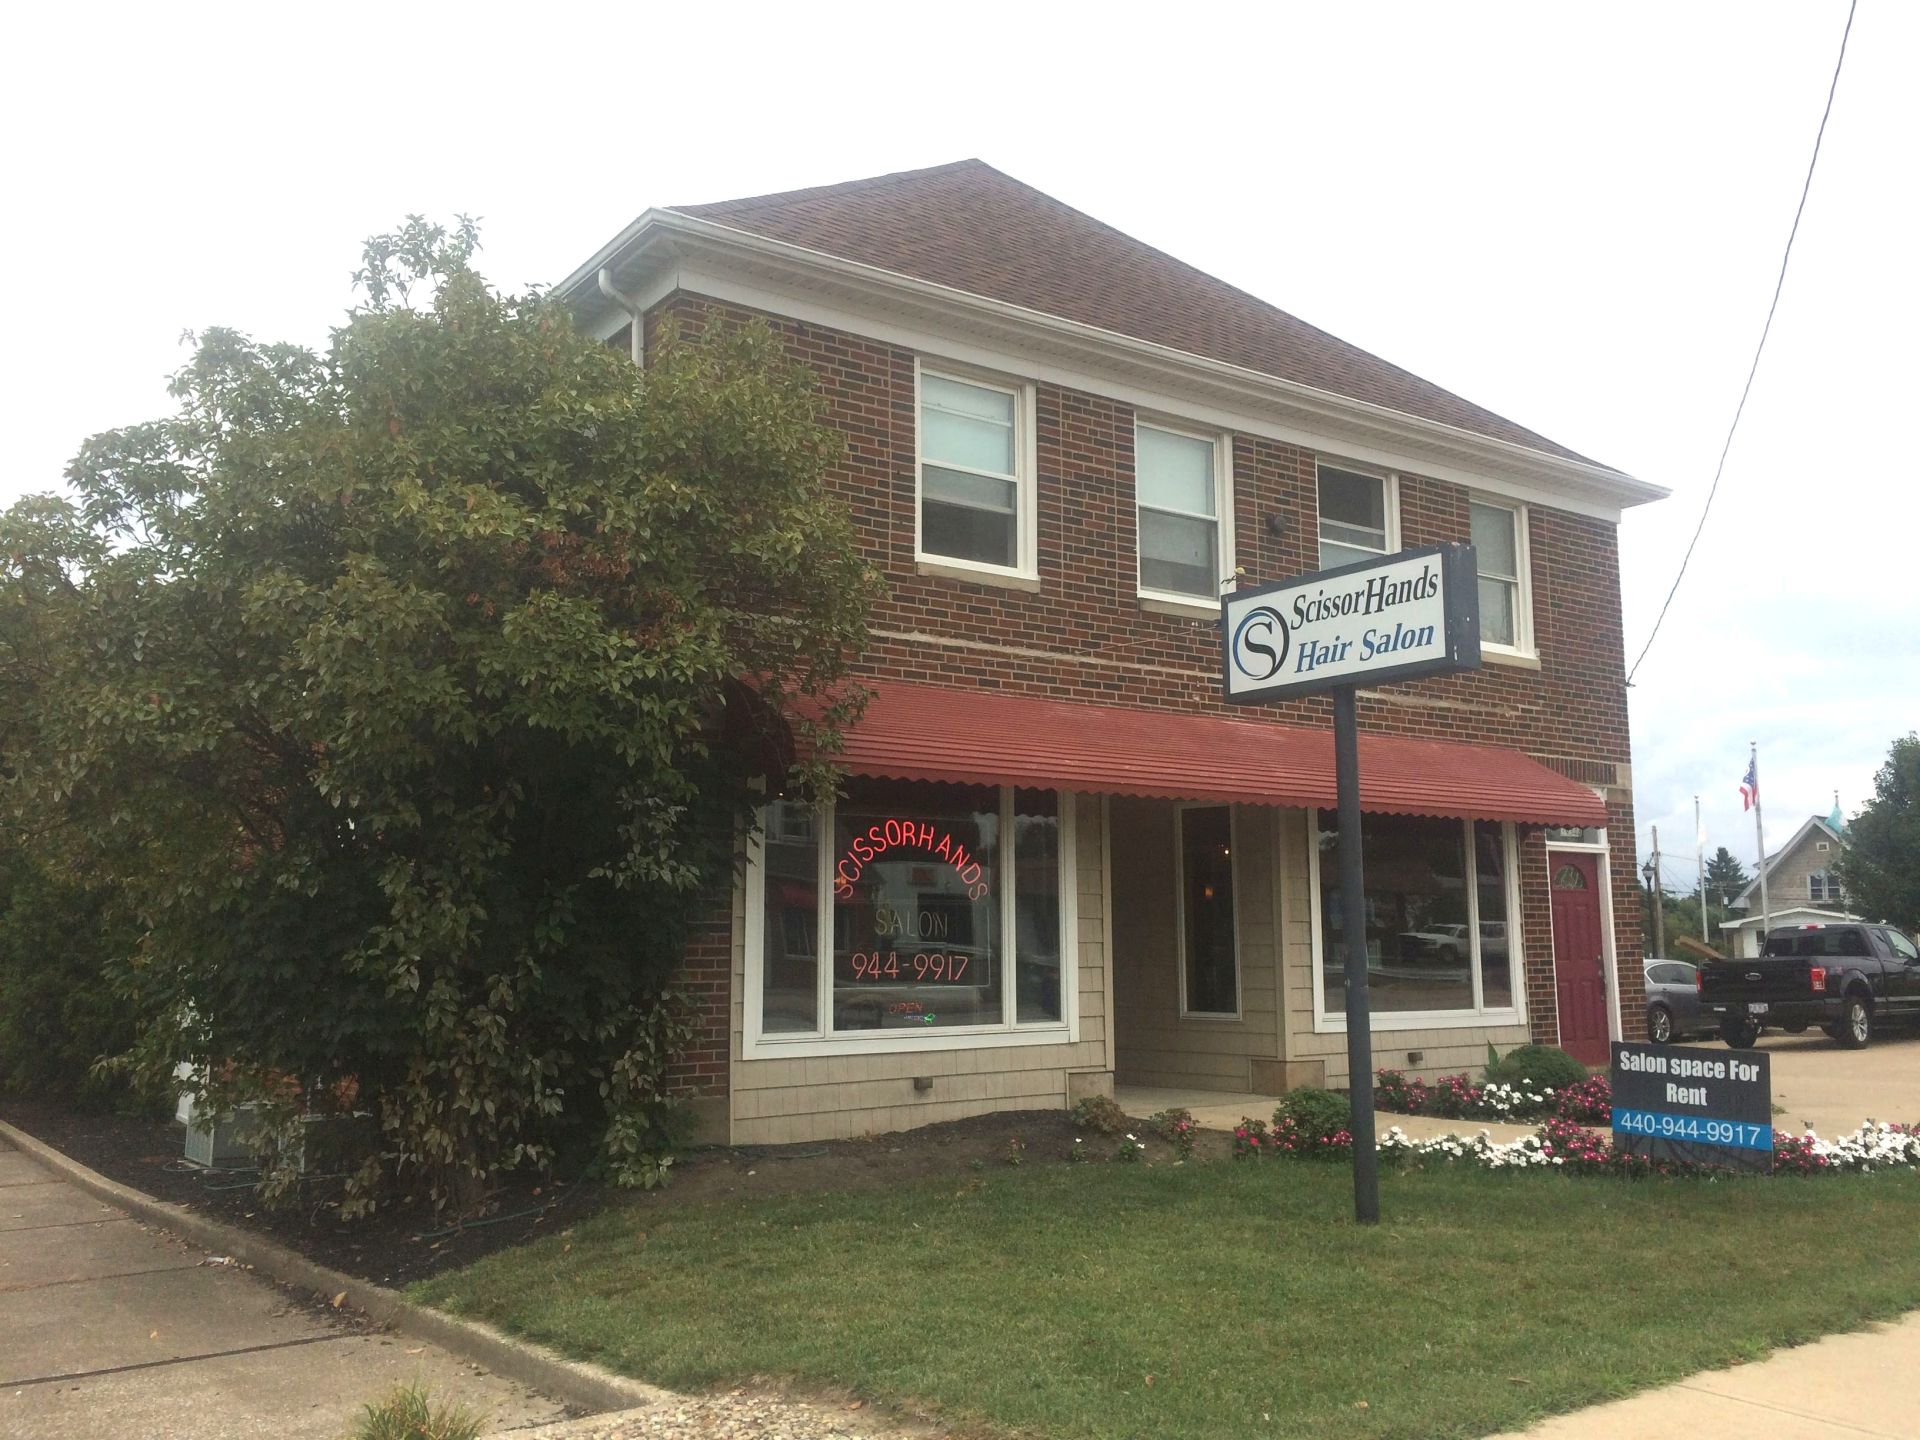 NEW RETAIL BUILDING FOR SALE IN WICKLIFFE!